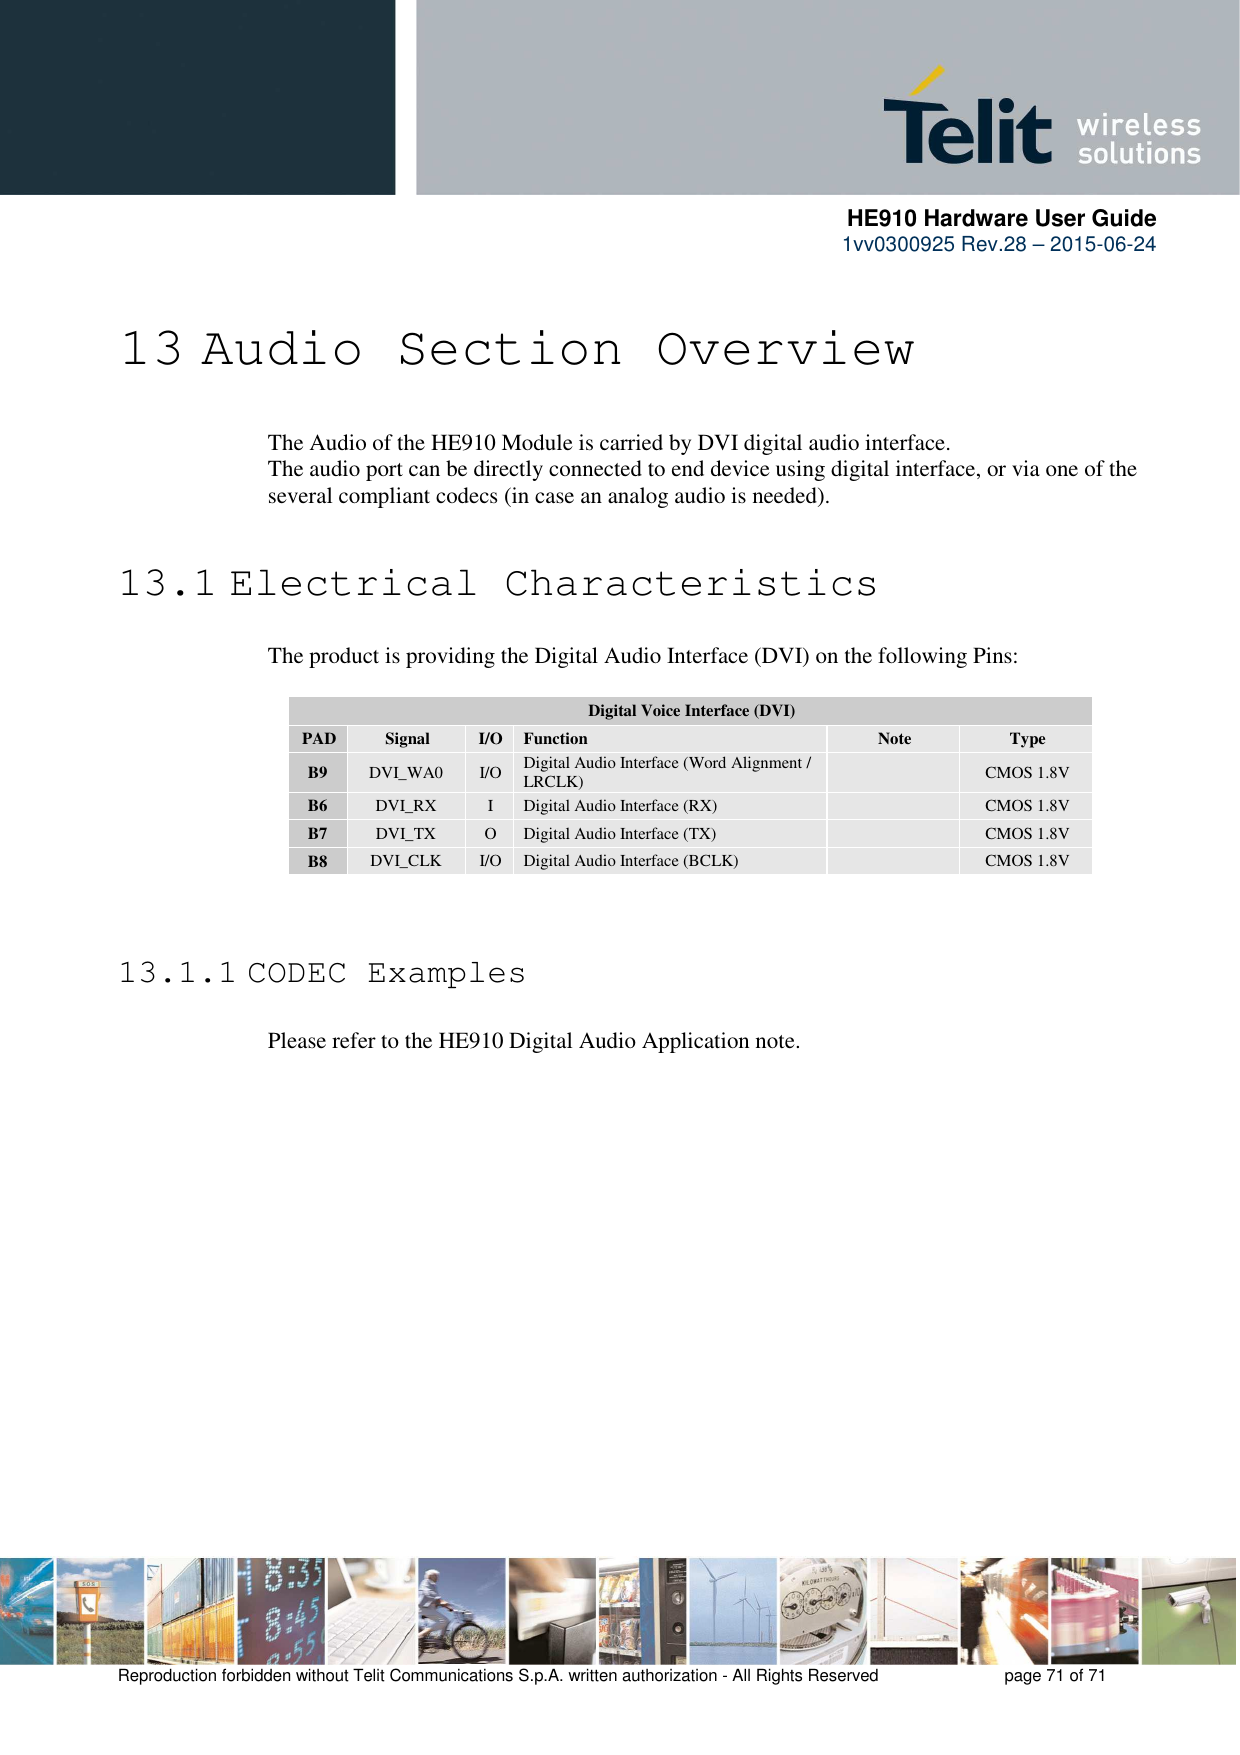      HE910 Hardware User Guide 1vv0300925 Rev.28 – 2015-06-24    Reproduction forbidden without Telit Communications S.p.A. written authorization - All Rights Reserved    page 71 of 71   13 Audio Section Overview  The Audio of the HE910 Module is carried by DVI digital audio interface. The audio port can be directly connected to end device using digital interface, or via one of the several compliant codecs (in case an analog audio is needed).  13.1 Electrical Characteristics The product is providing the Digital Audio Interface (DVI) on the following Pins:  Digital Voice Interface (DVI) PAD  Signal  I/O  Function  Note  Type B9  DVI_WA0  I/O  Digital Audio Interface (Word Alignment / LRCLK)    CMOS 1.8V B6  DVI_RX  I  Digital Audio Interface (RX)    CMOS 1.8V B7  DVI_TX  O  Digital Audio Interface (TX)    CMOS 1.8V B8  DVI_CLK  I/O  Digital Audio Interface (BCLK)    CMOS 1.8V   13.1.1 CODEC Examples  Please refer to the HE910 Digital Audio Application note. 